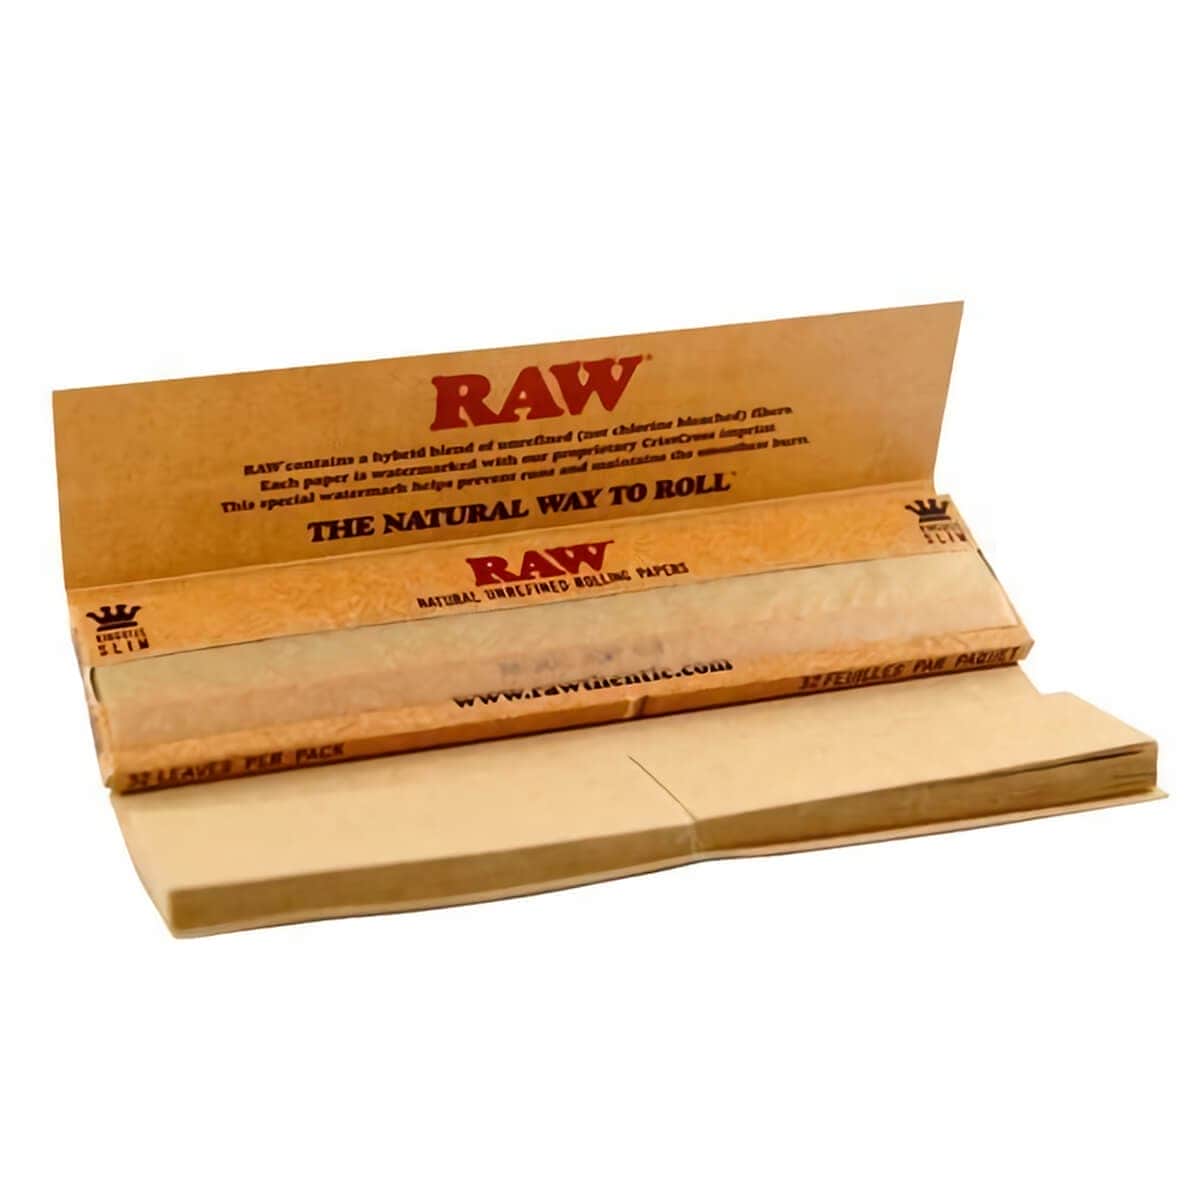 RAW CLASSIC CONNOISSEUR KING SIZE SLIM